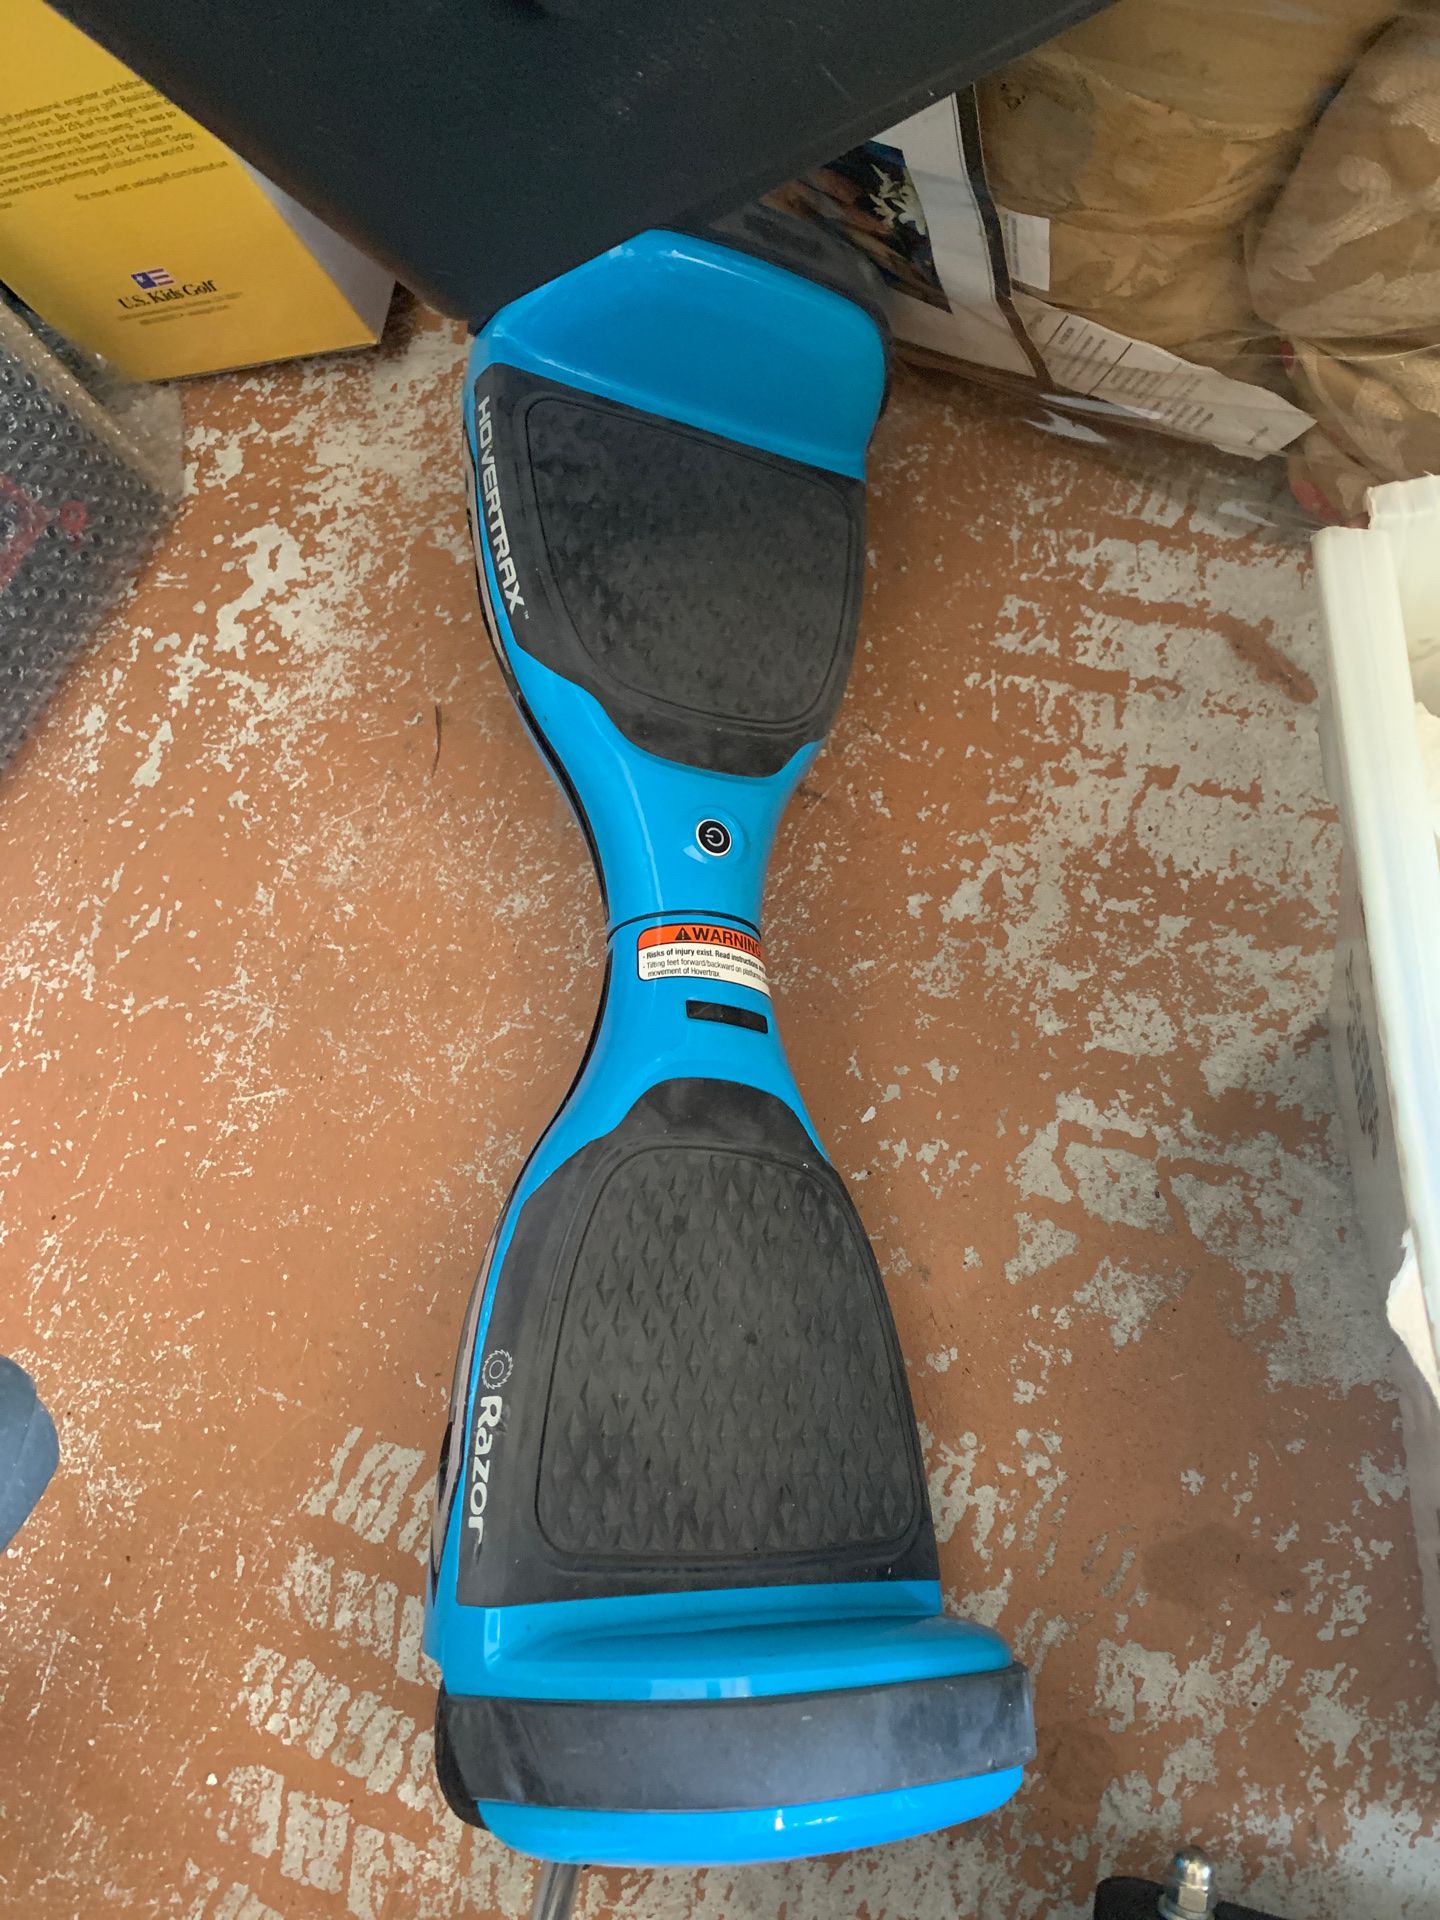 FREE: Razor hover board - works well, the battery died, needs new battery and will work great.